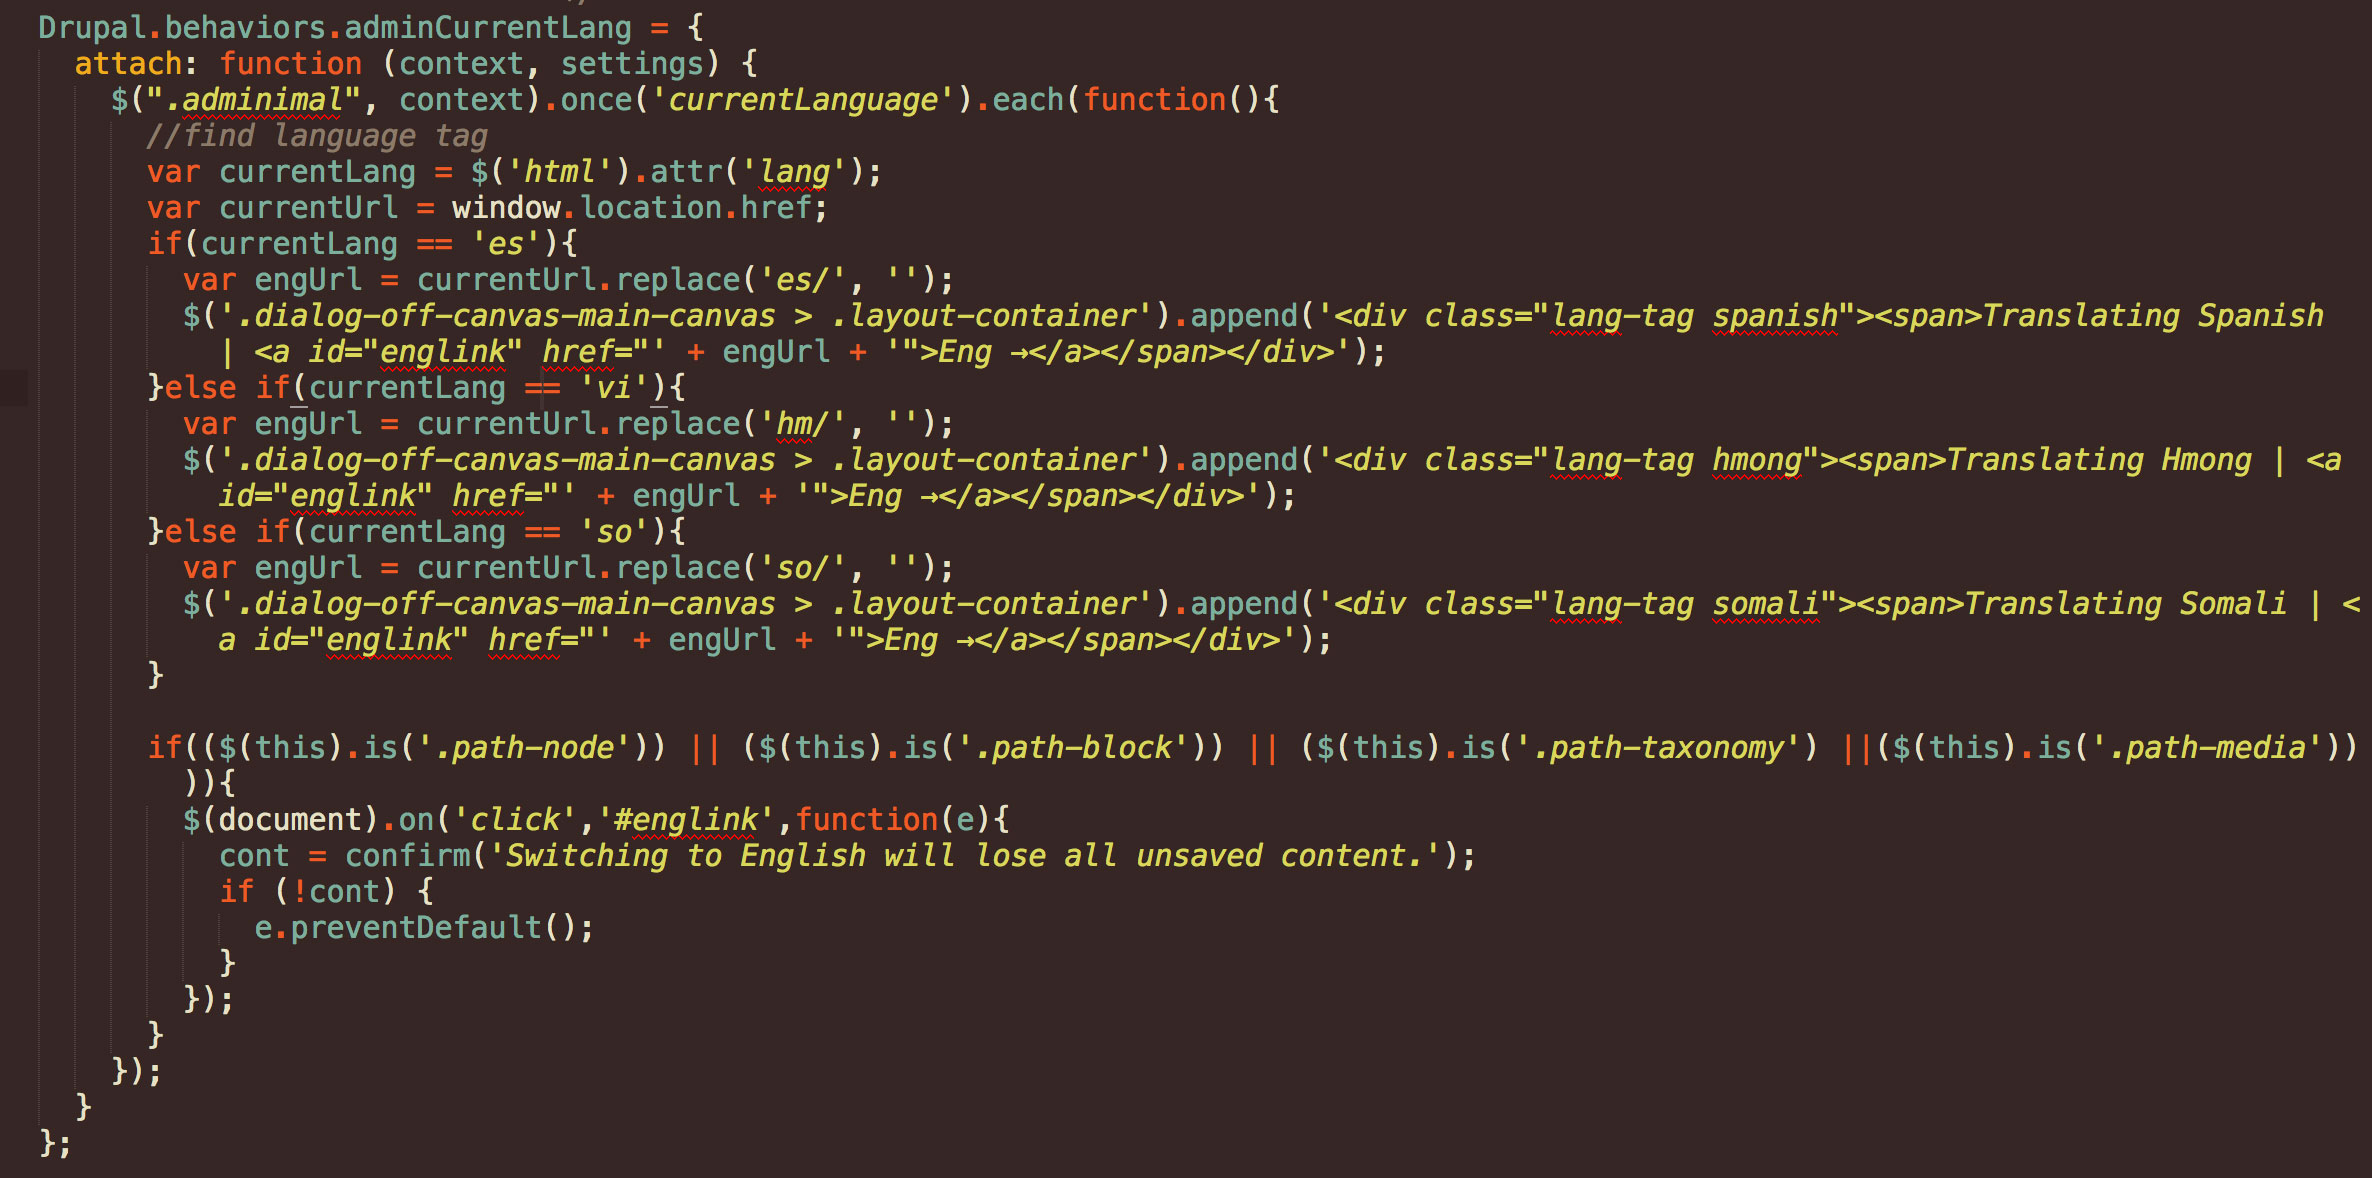 Screenshot of JS code to provide custom current language tag on admin theme